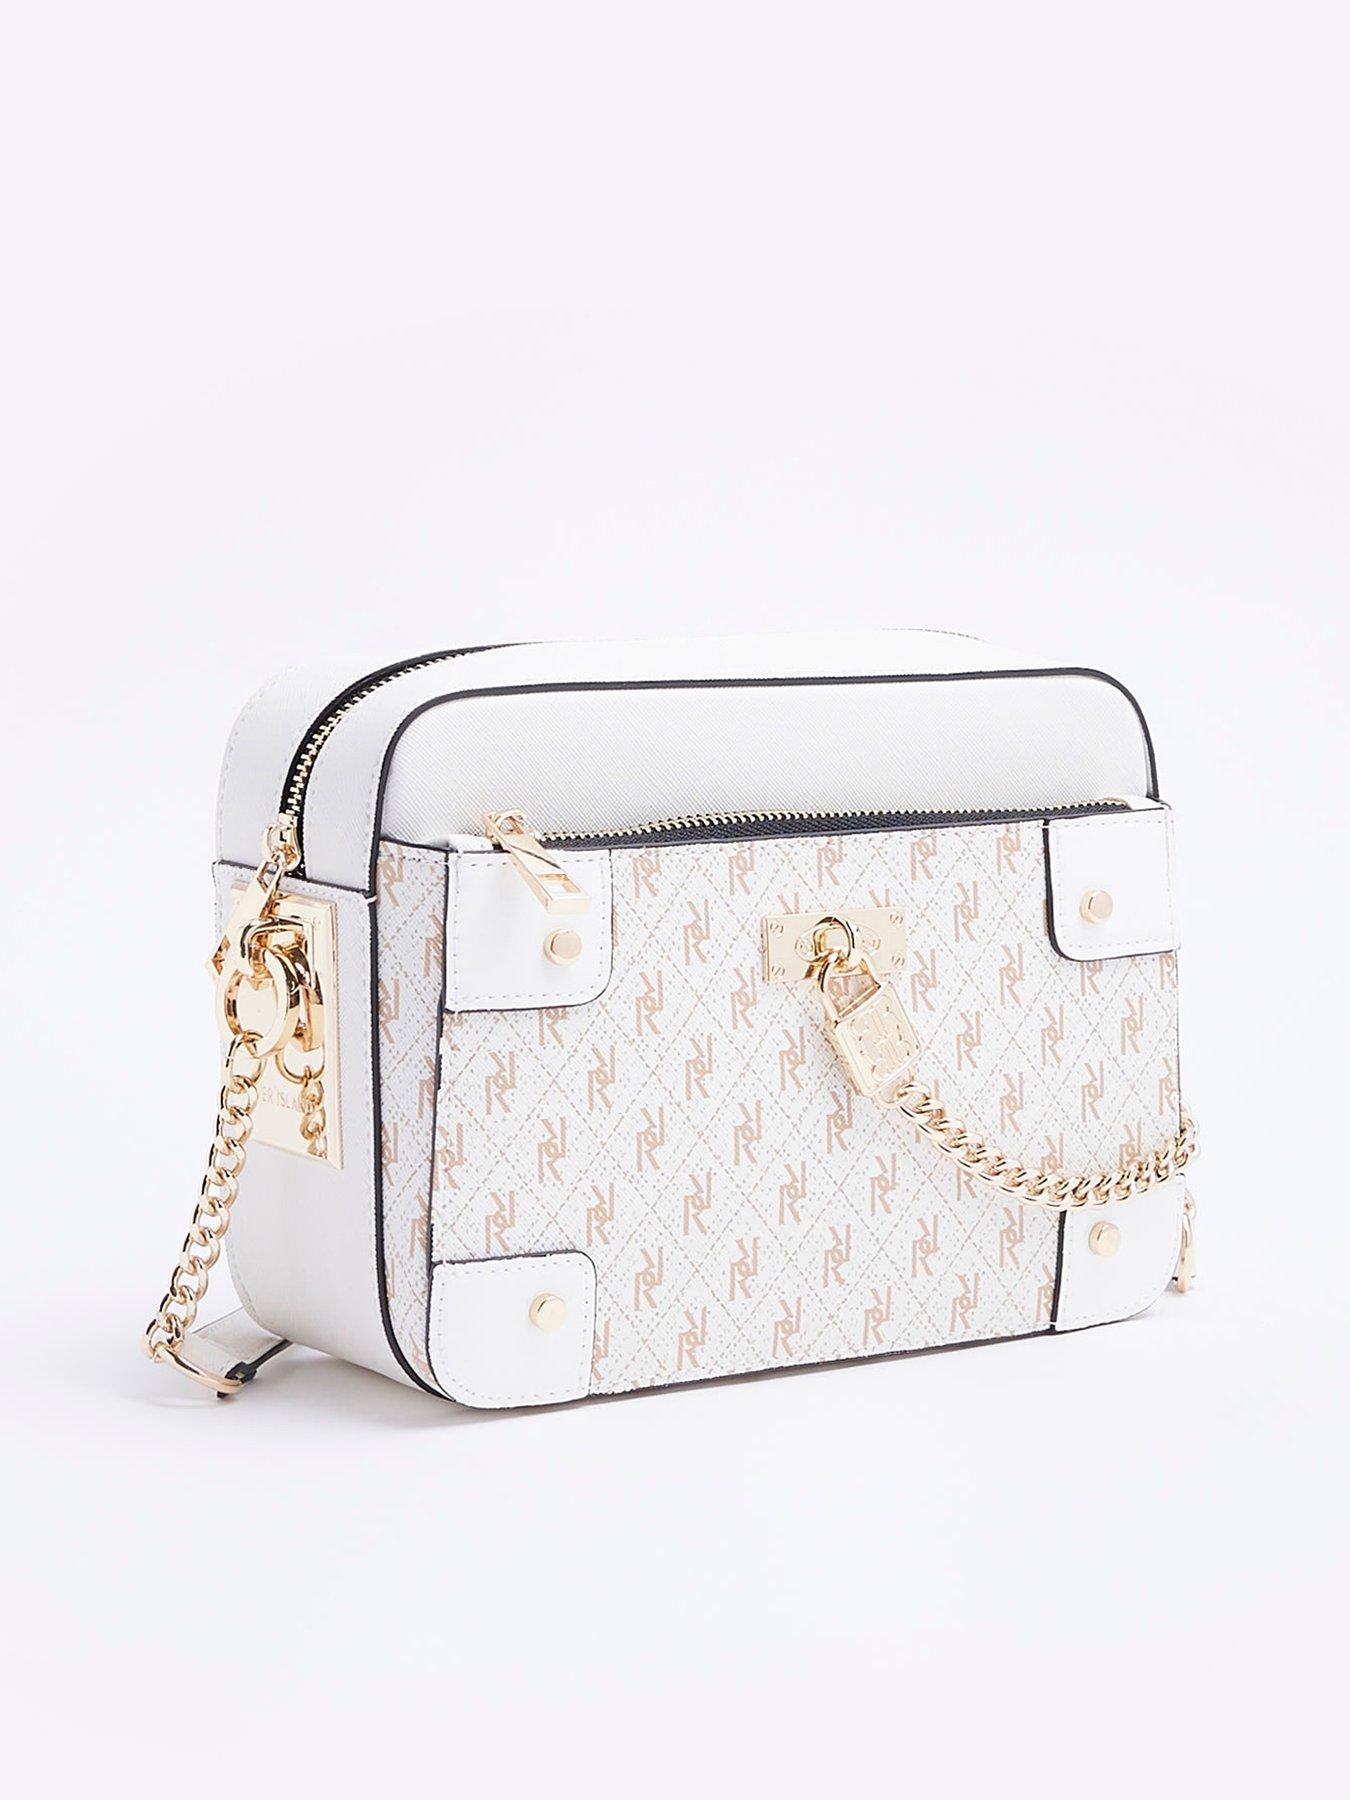 River Island boxy cross body bag with padlock detail in white